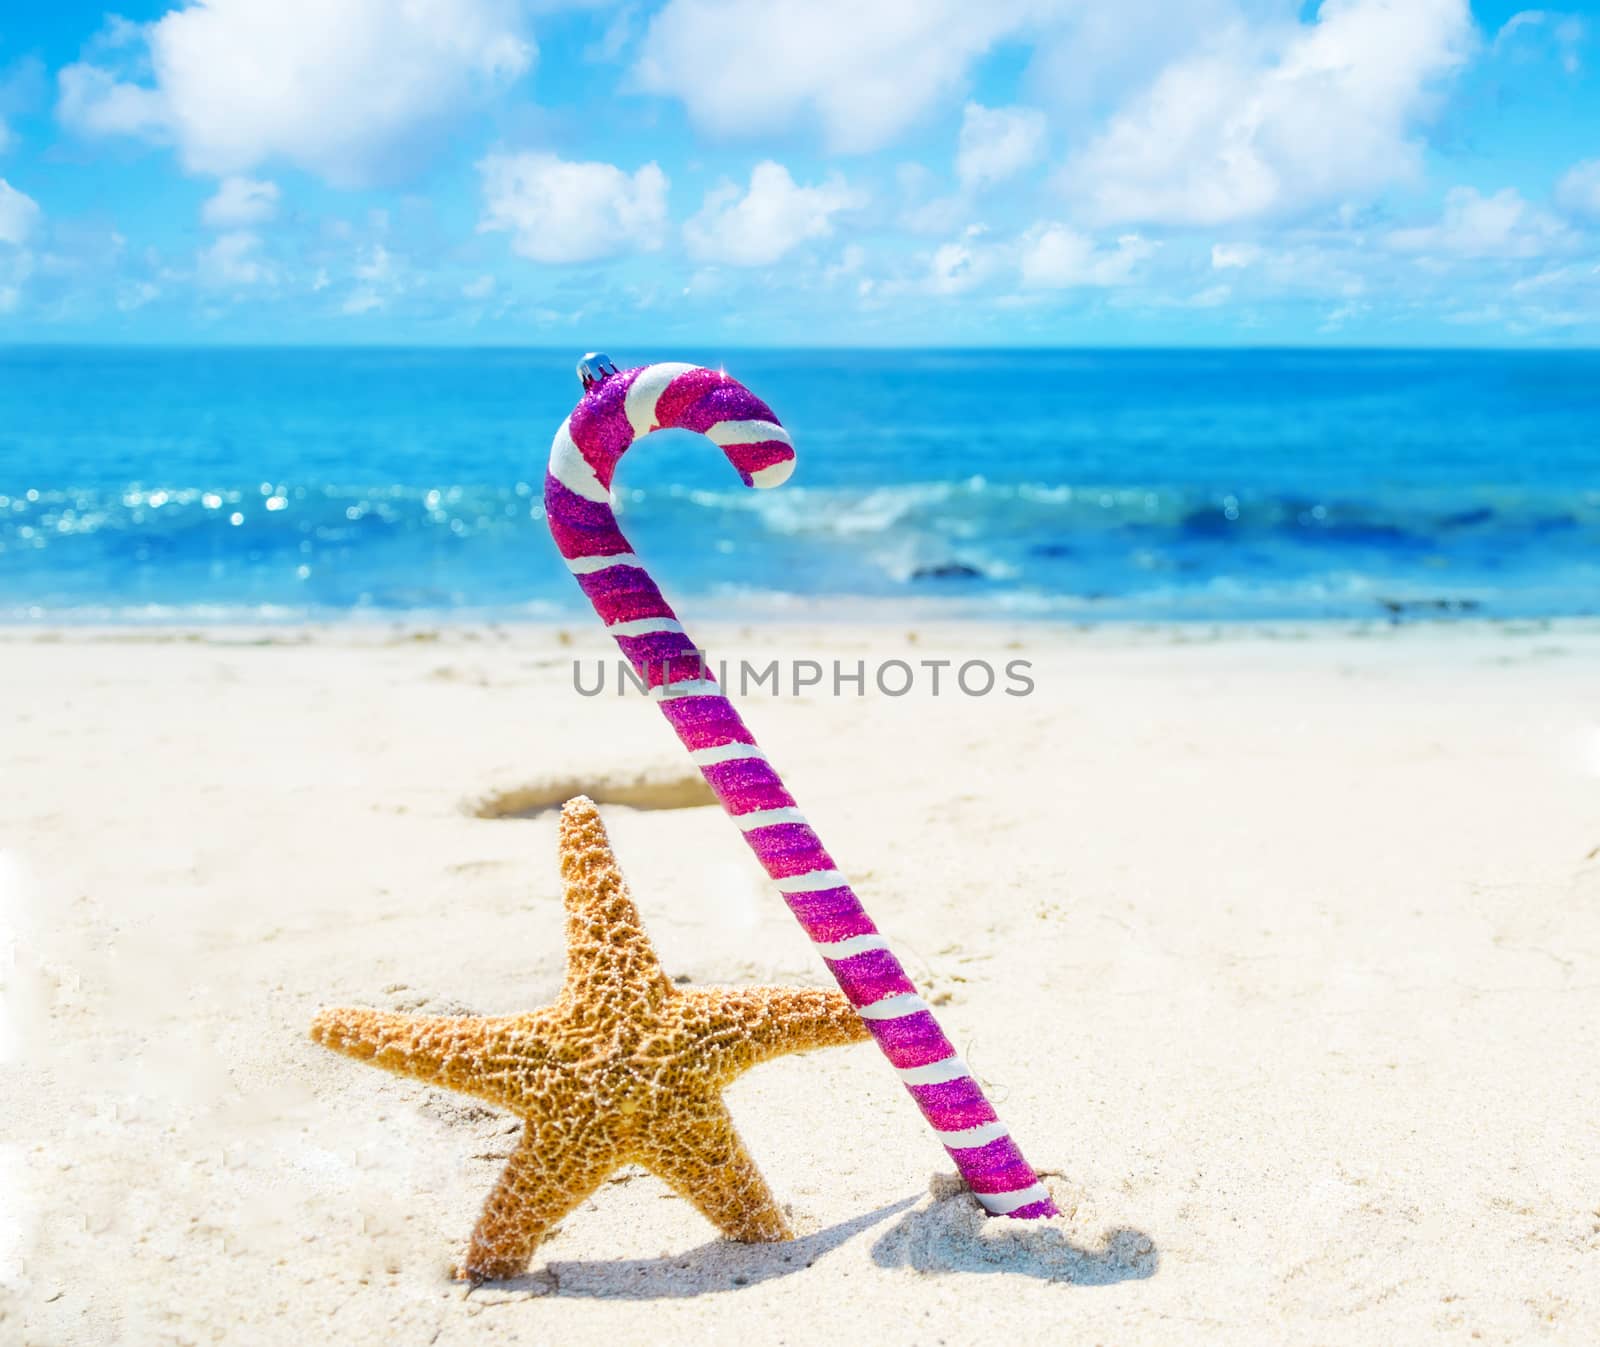 Starfish with Christmas decoration on sandy beach in sunny day- holiday concept